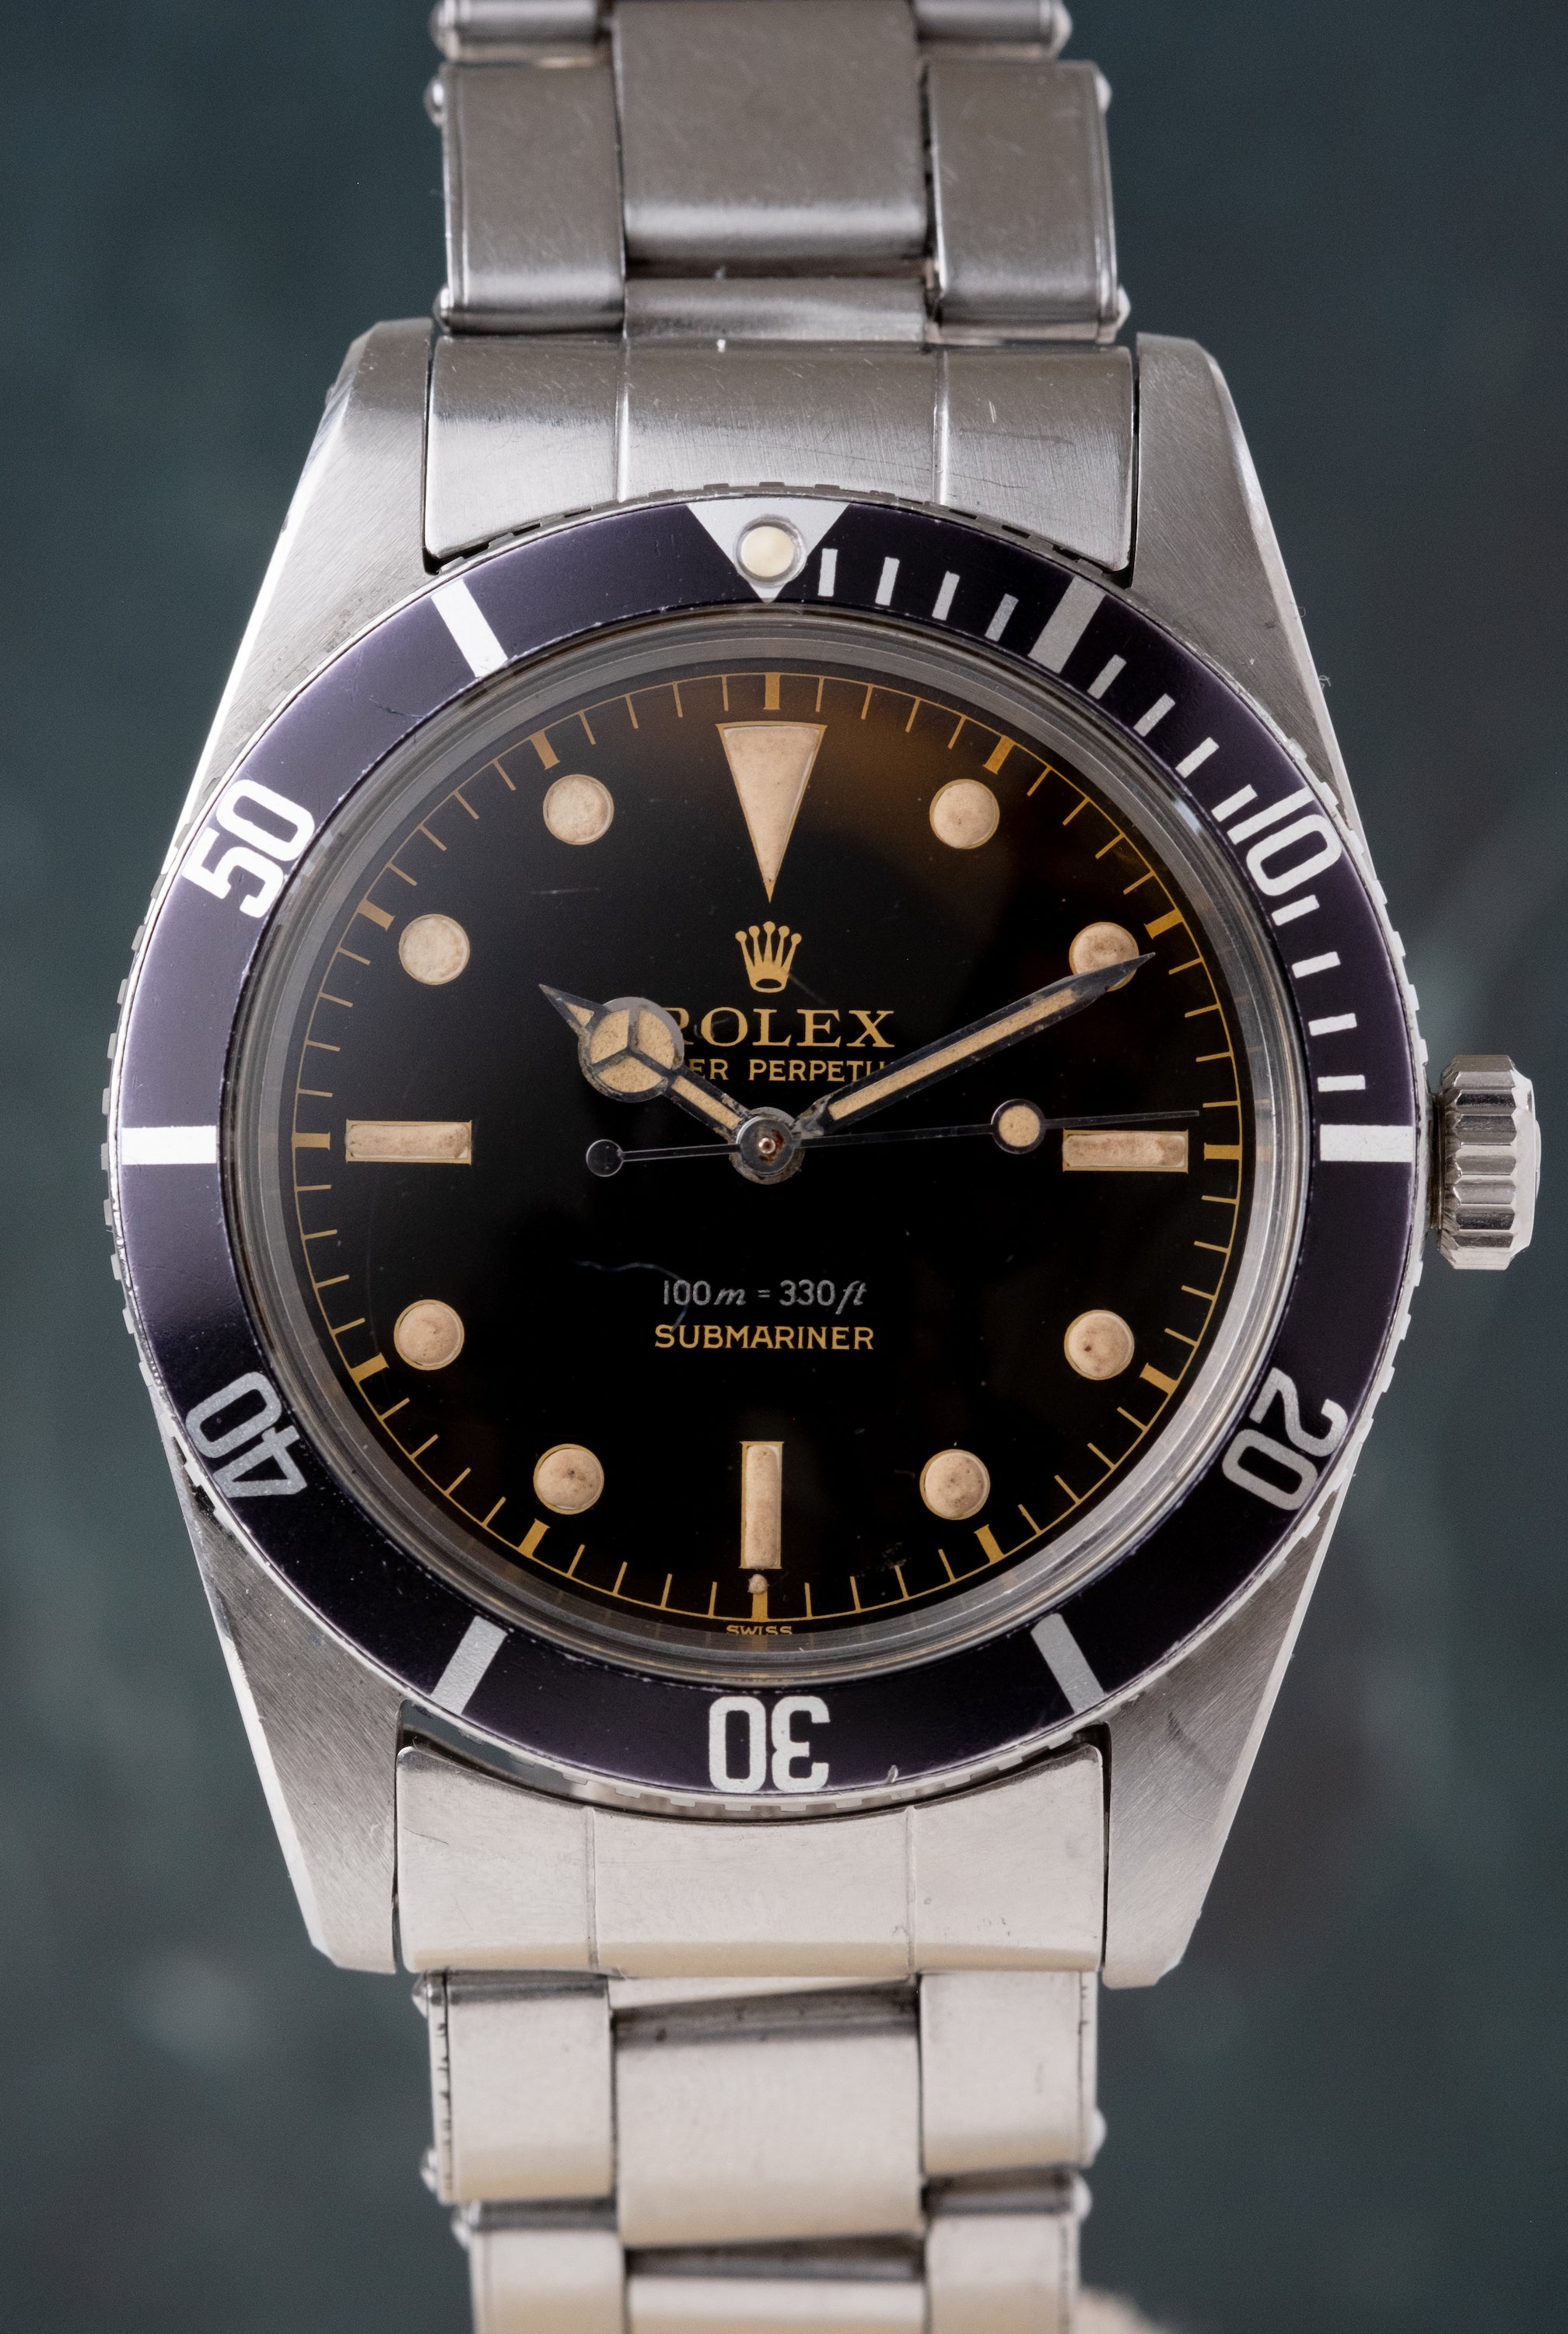 ROLEX Submariner Small Crown Ref. 5508 Gilt Exclamation Point Dial Box, Guarantee and Service Papers (1959)